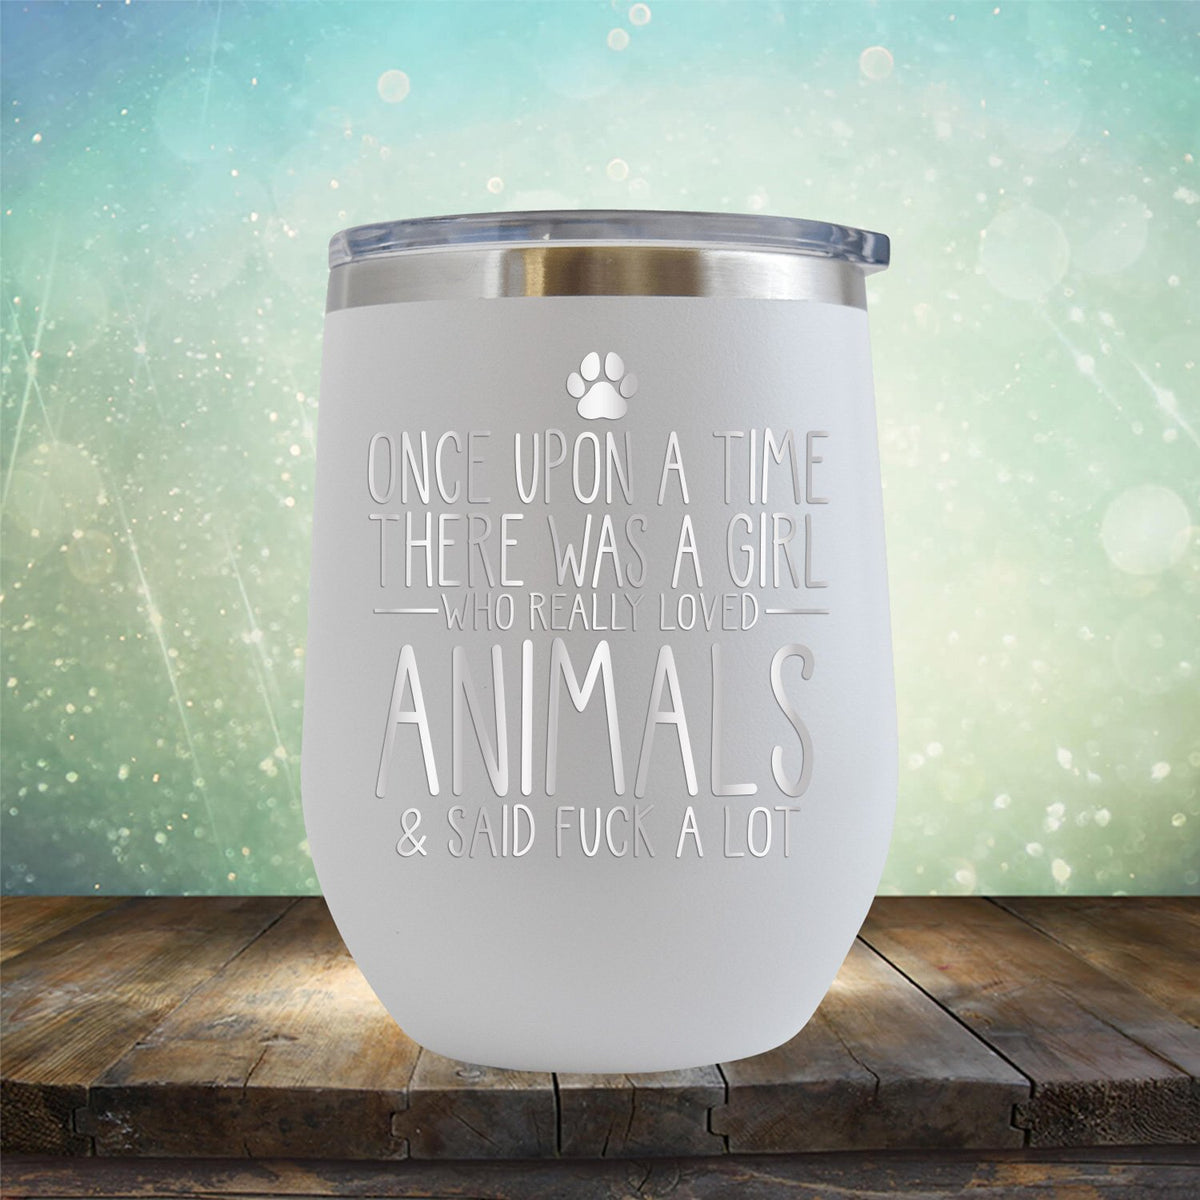 Once Upon A Time There Was A Girl Who Really Loved Animals &amp; Said Fuck A Lot - Stemless Wine Cup